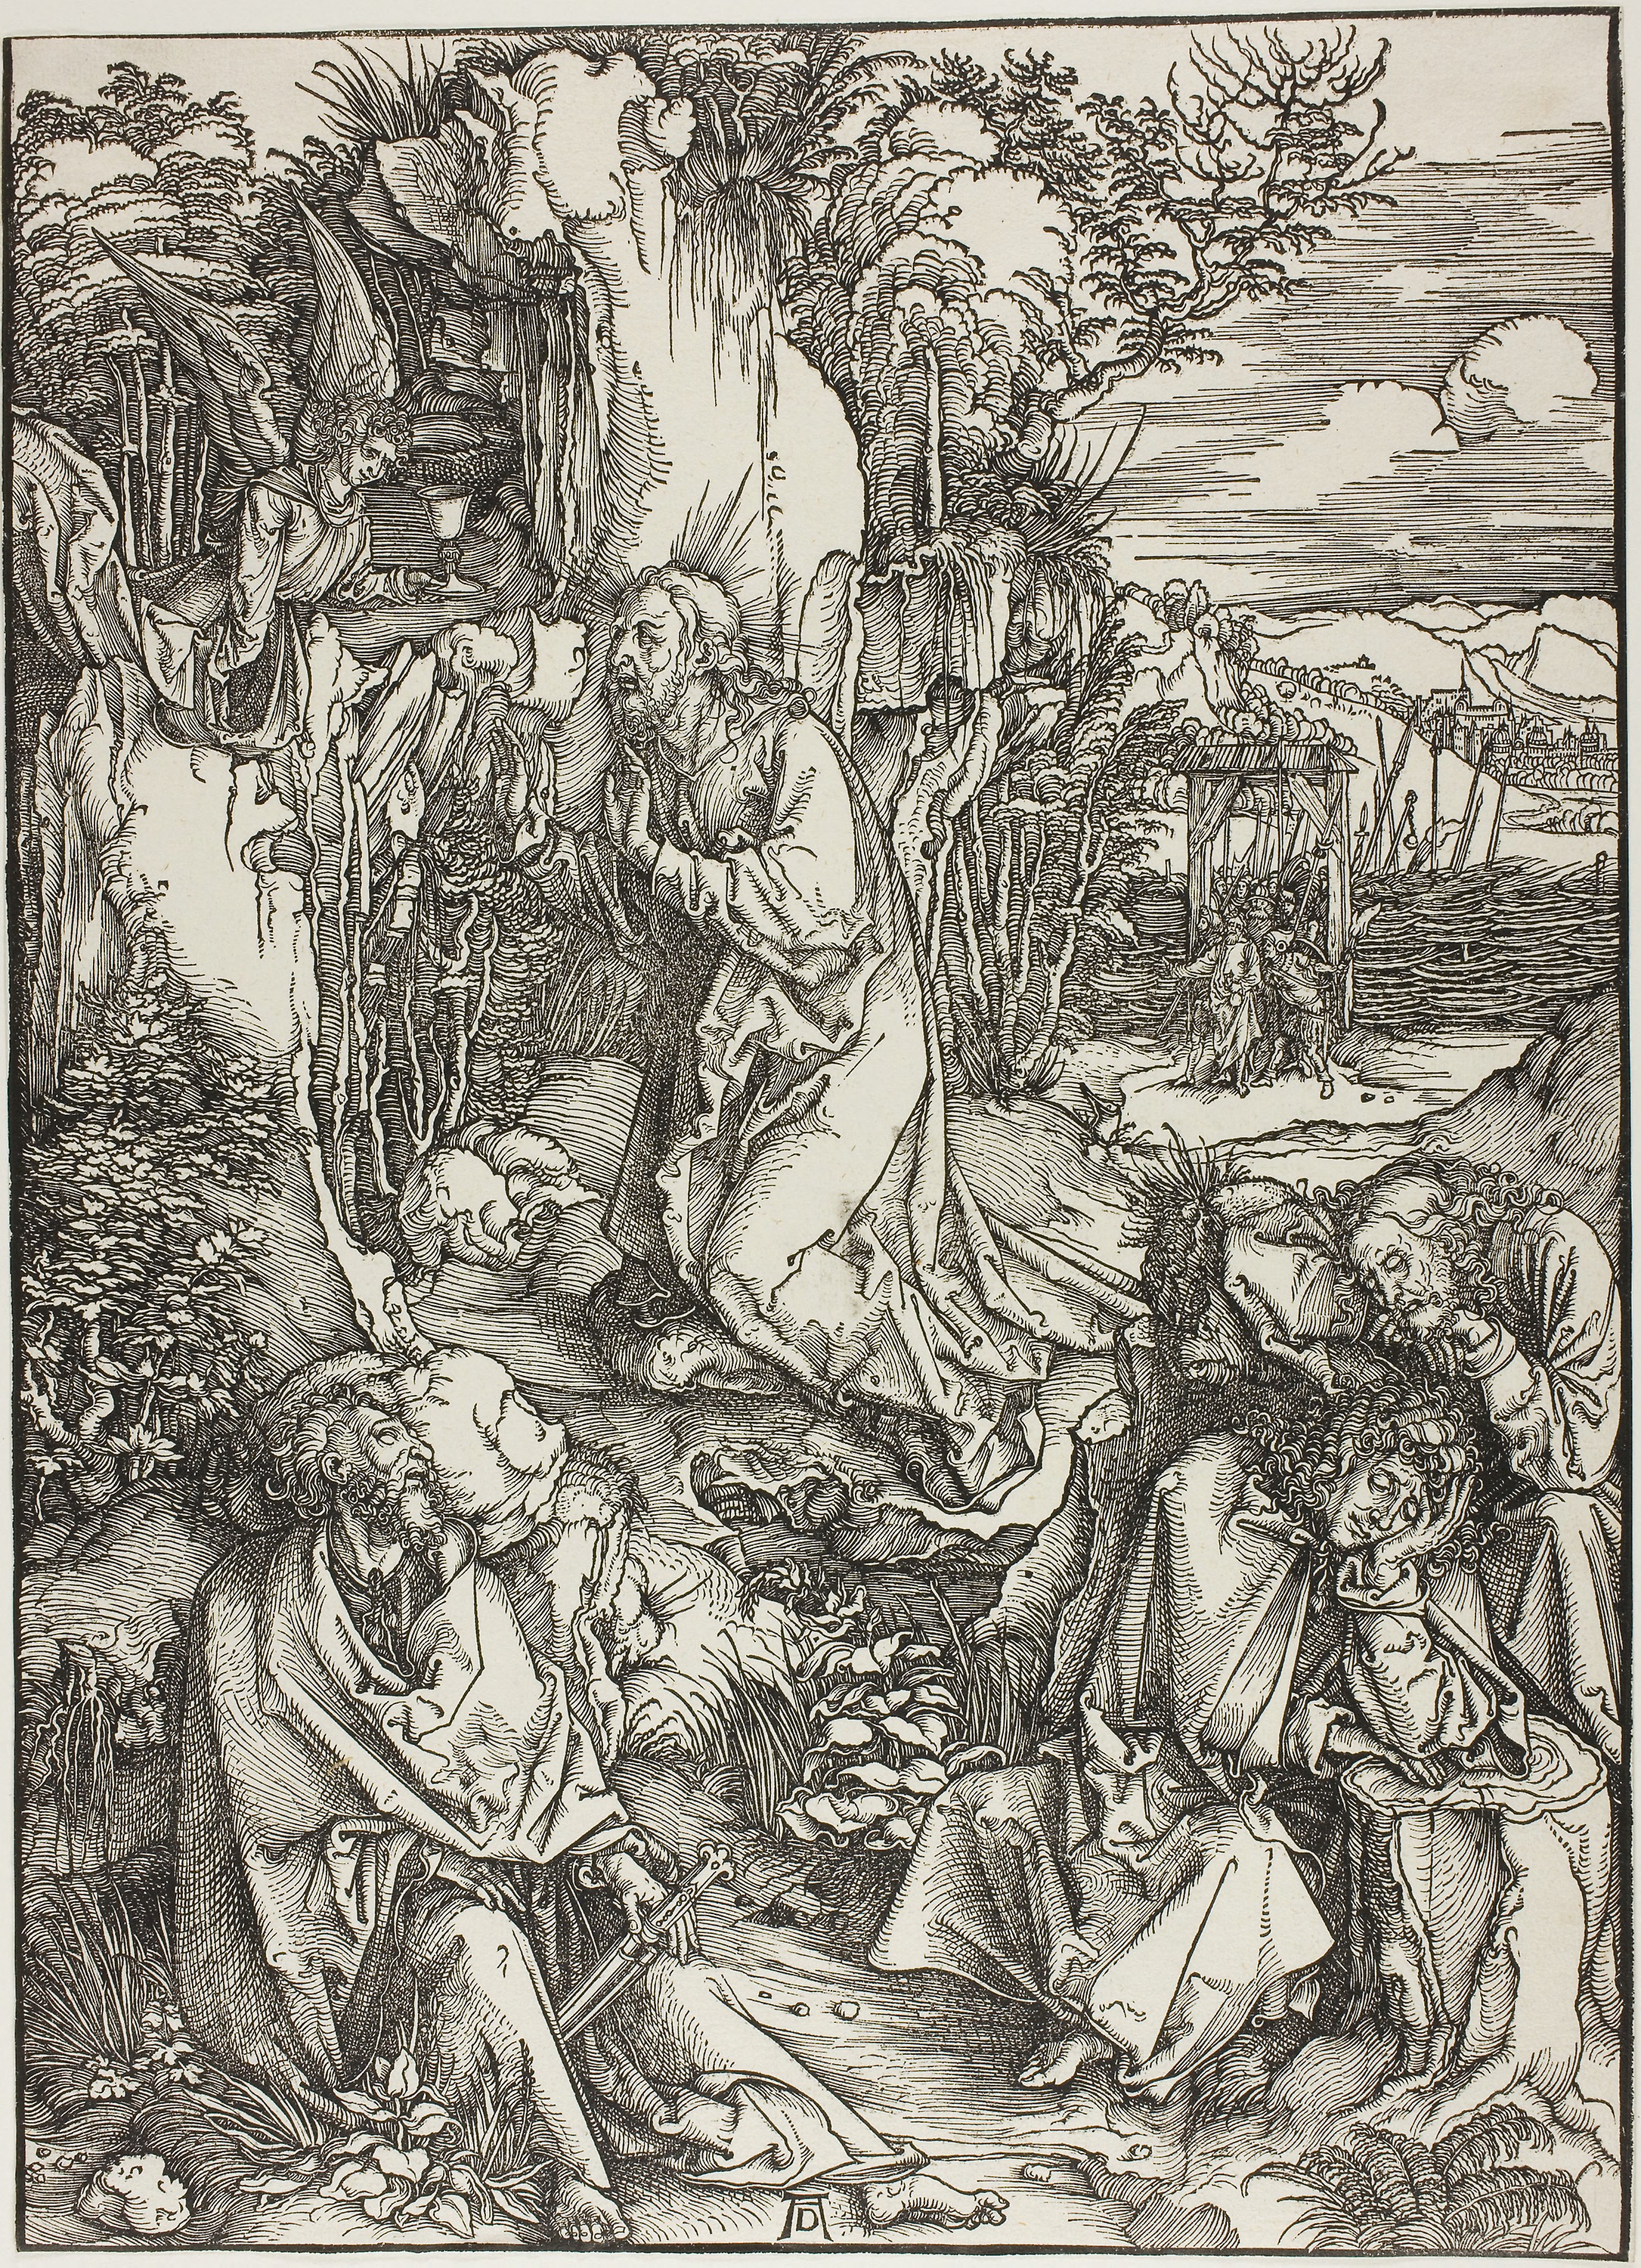 Agony in the Garden Image